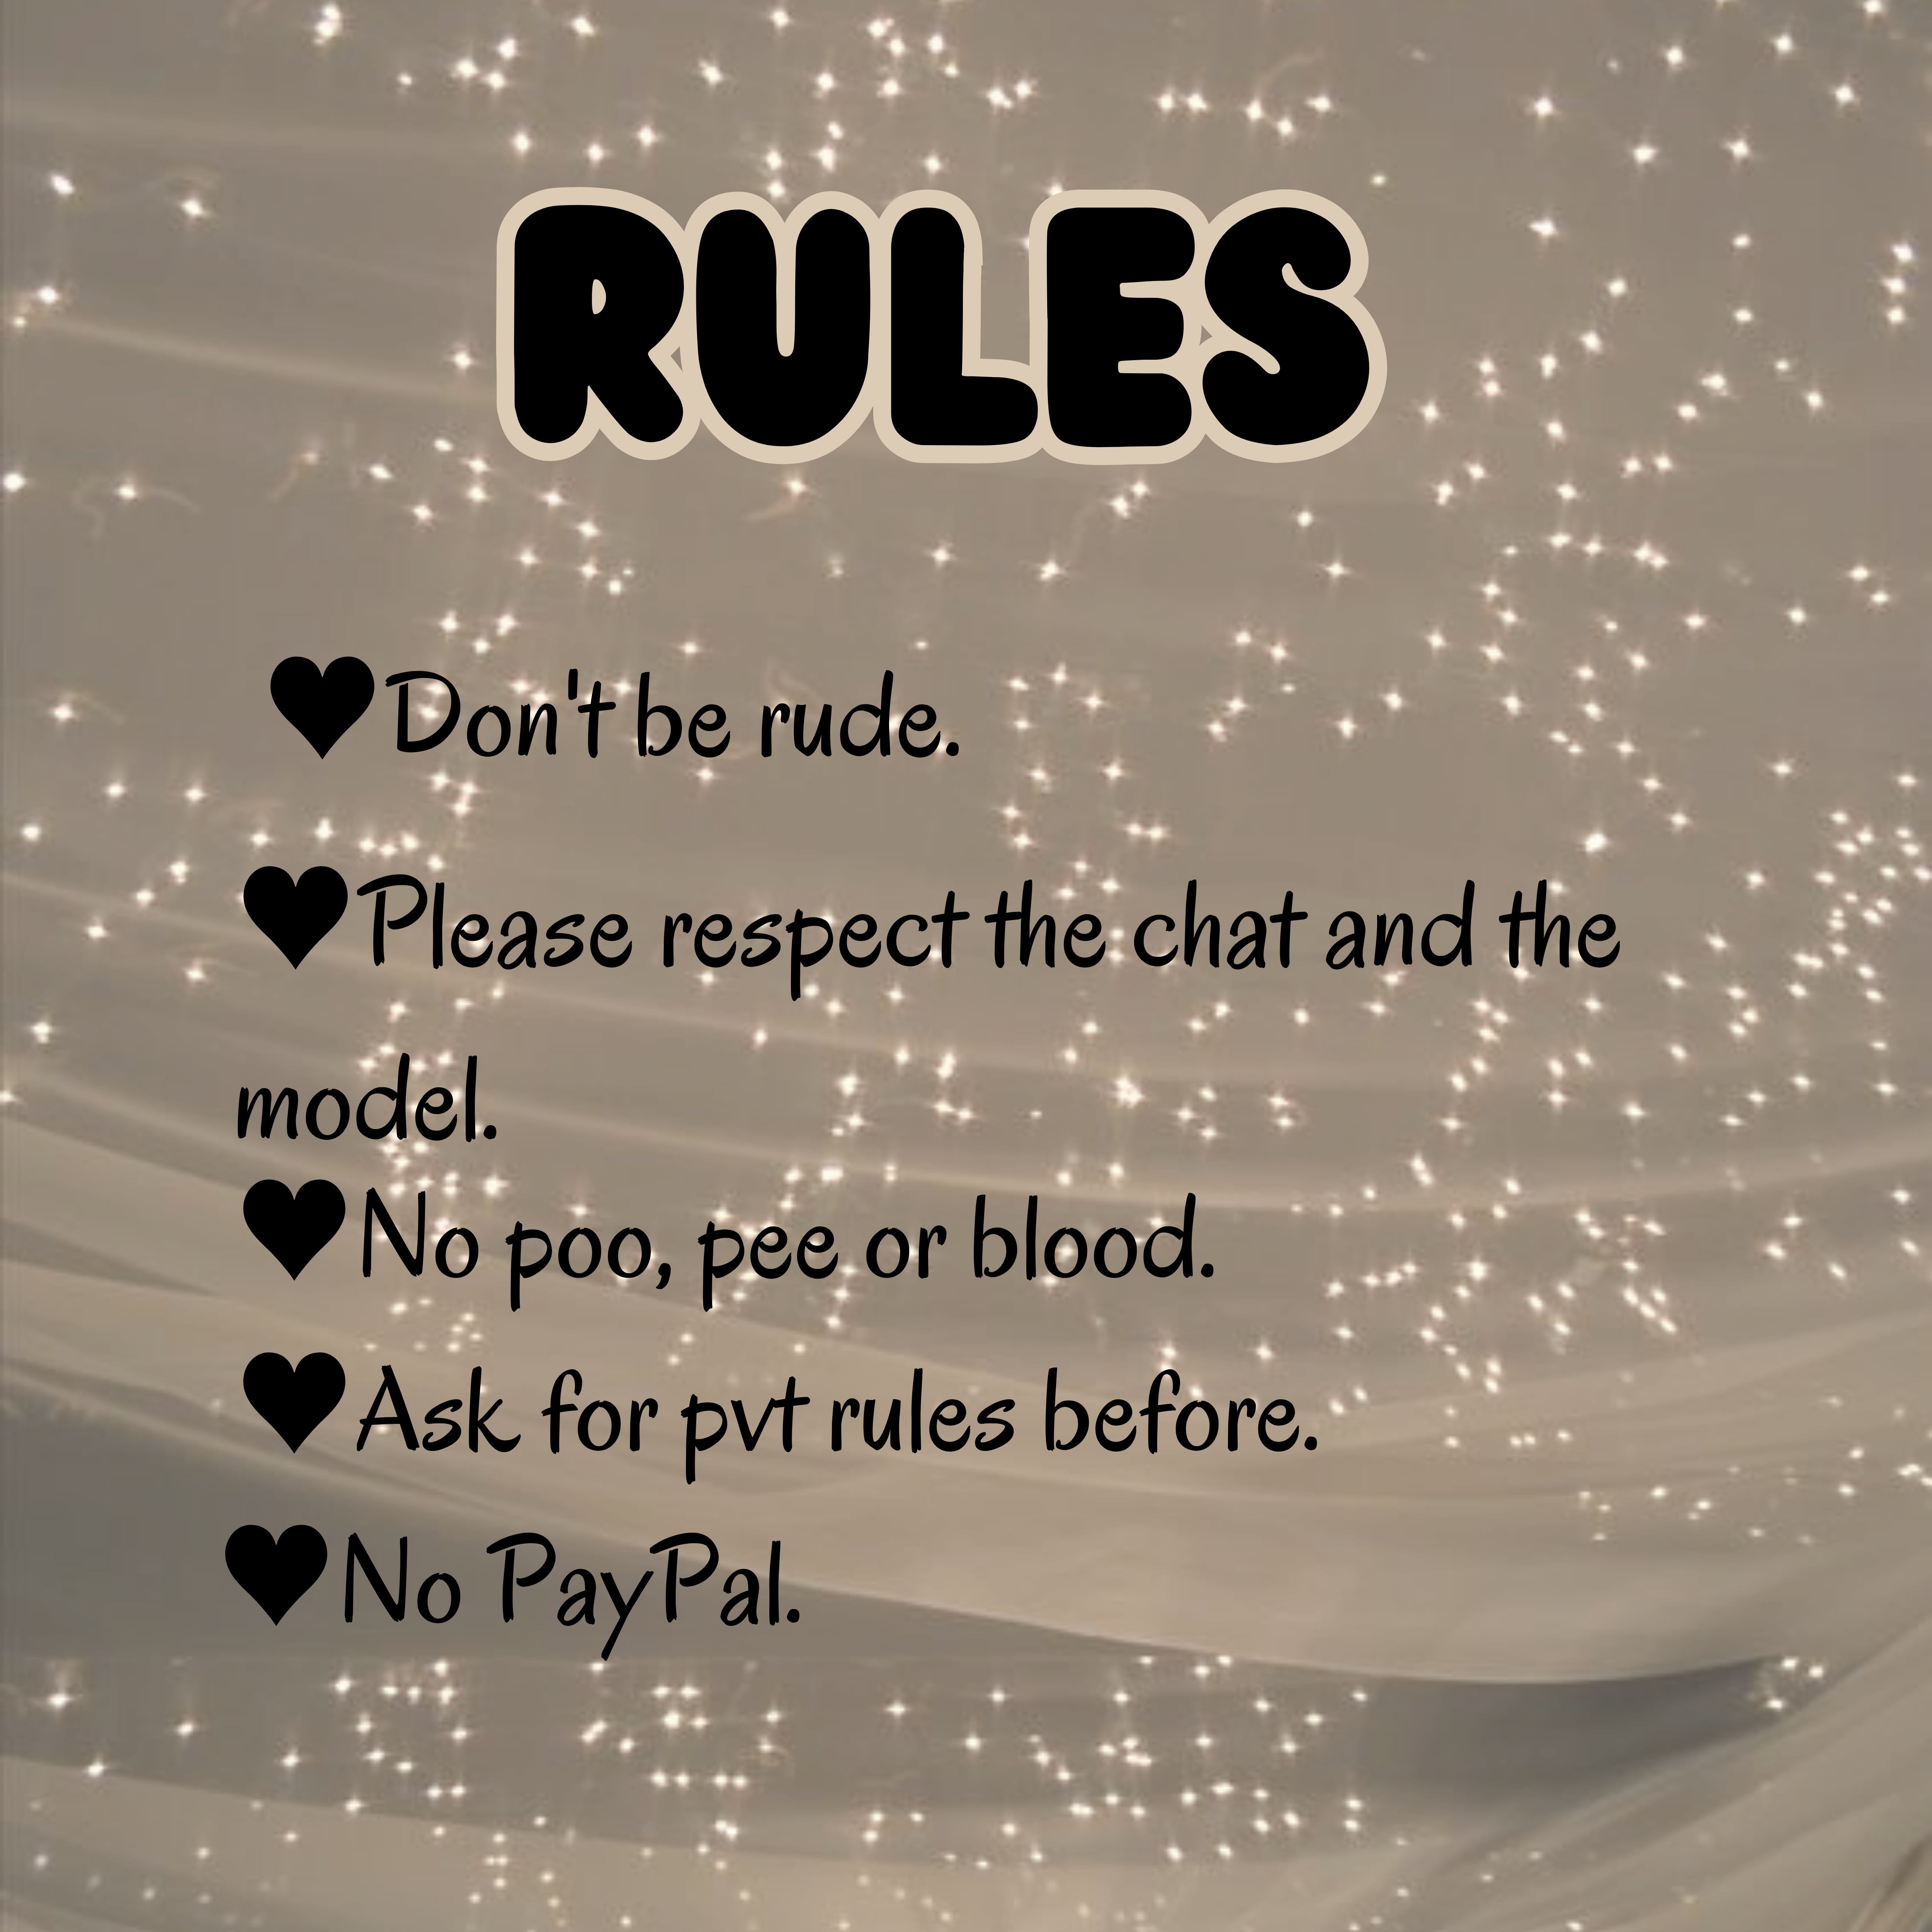 -liss05 Rules image: 1